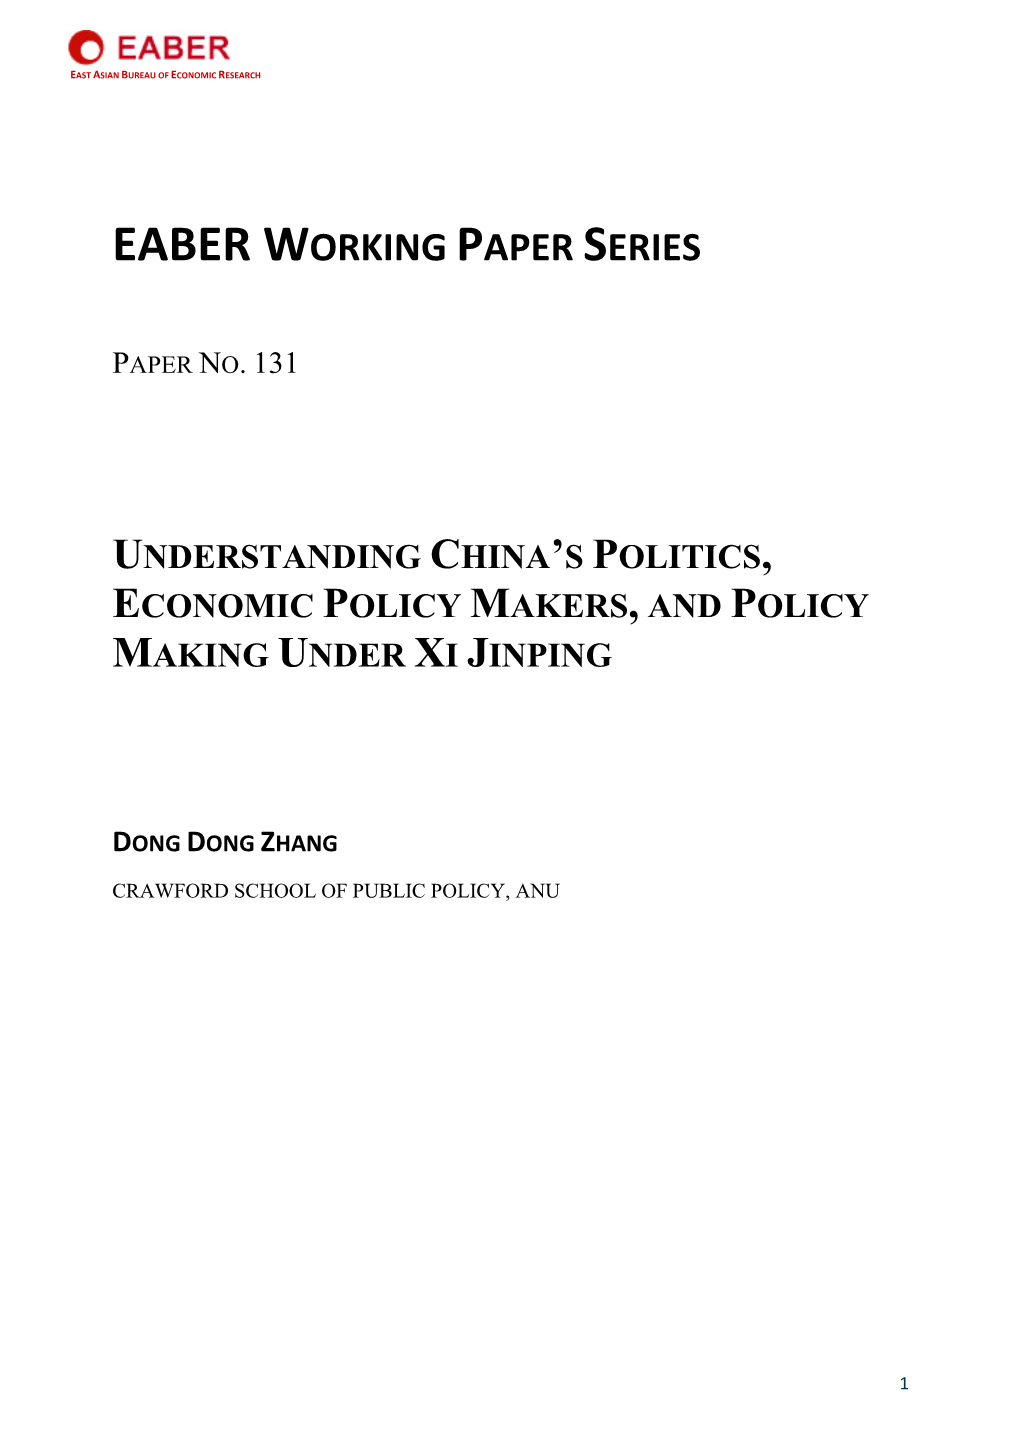 Understanding China's Politics, Economic Policy Makers and Policy